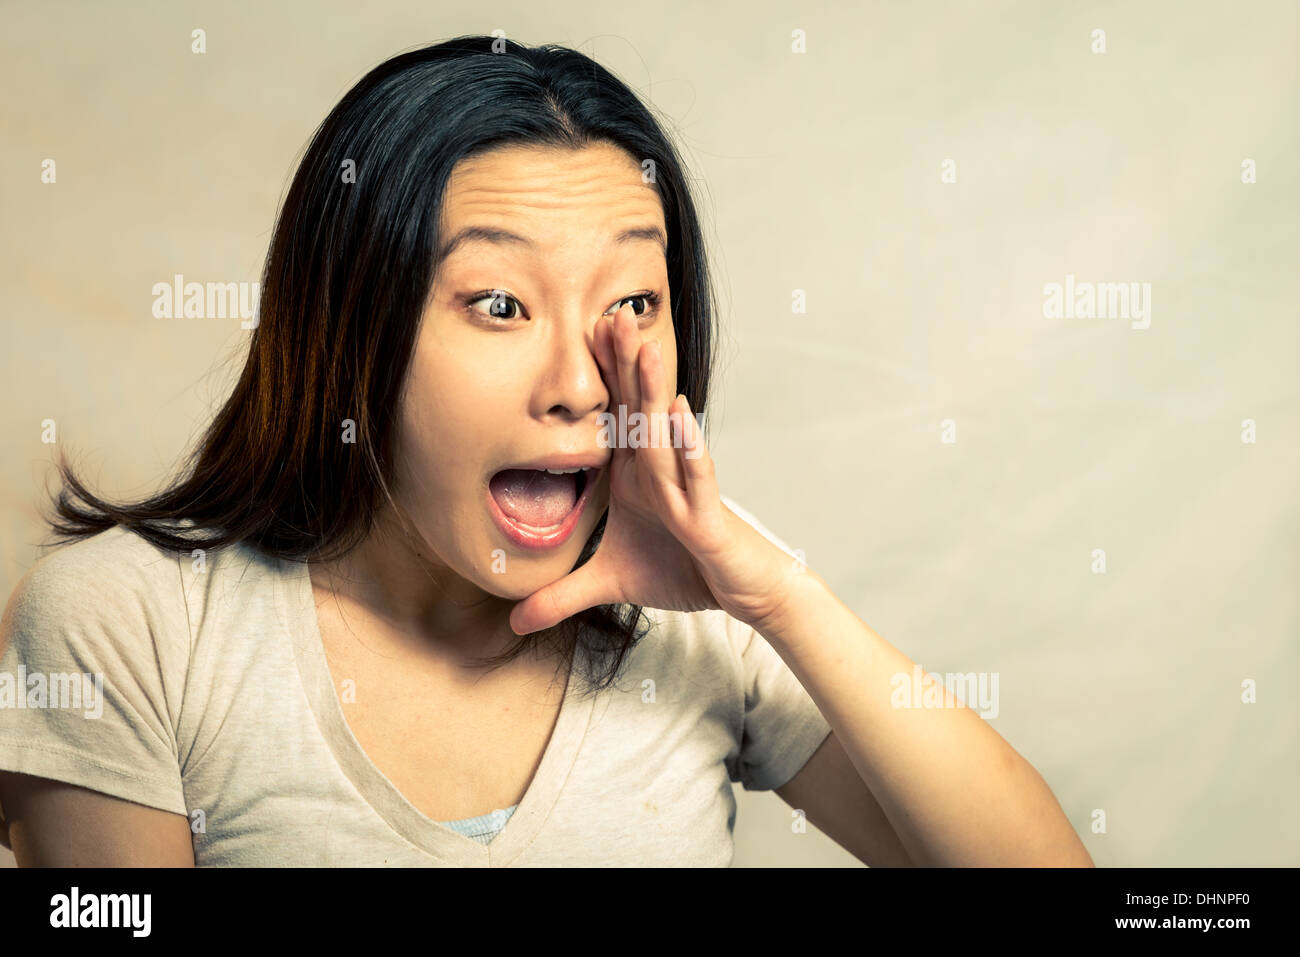 Young woman shouting, with fashion tone and background Stock Photo